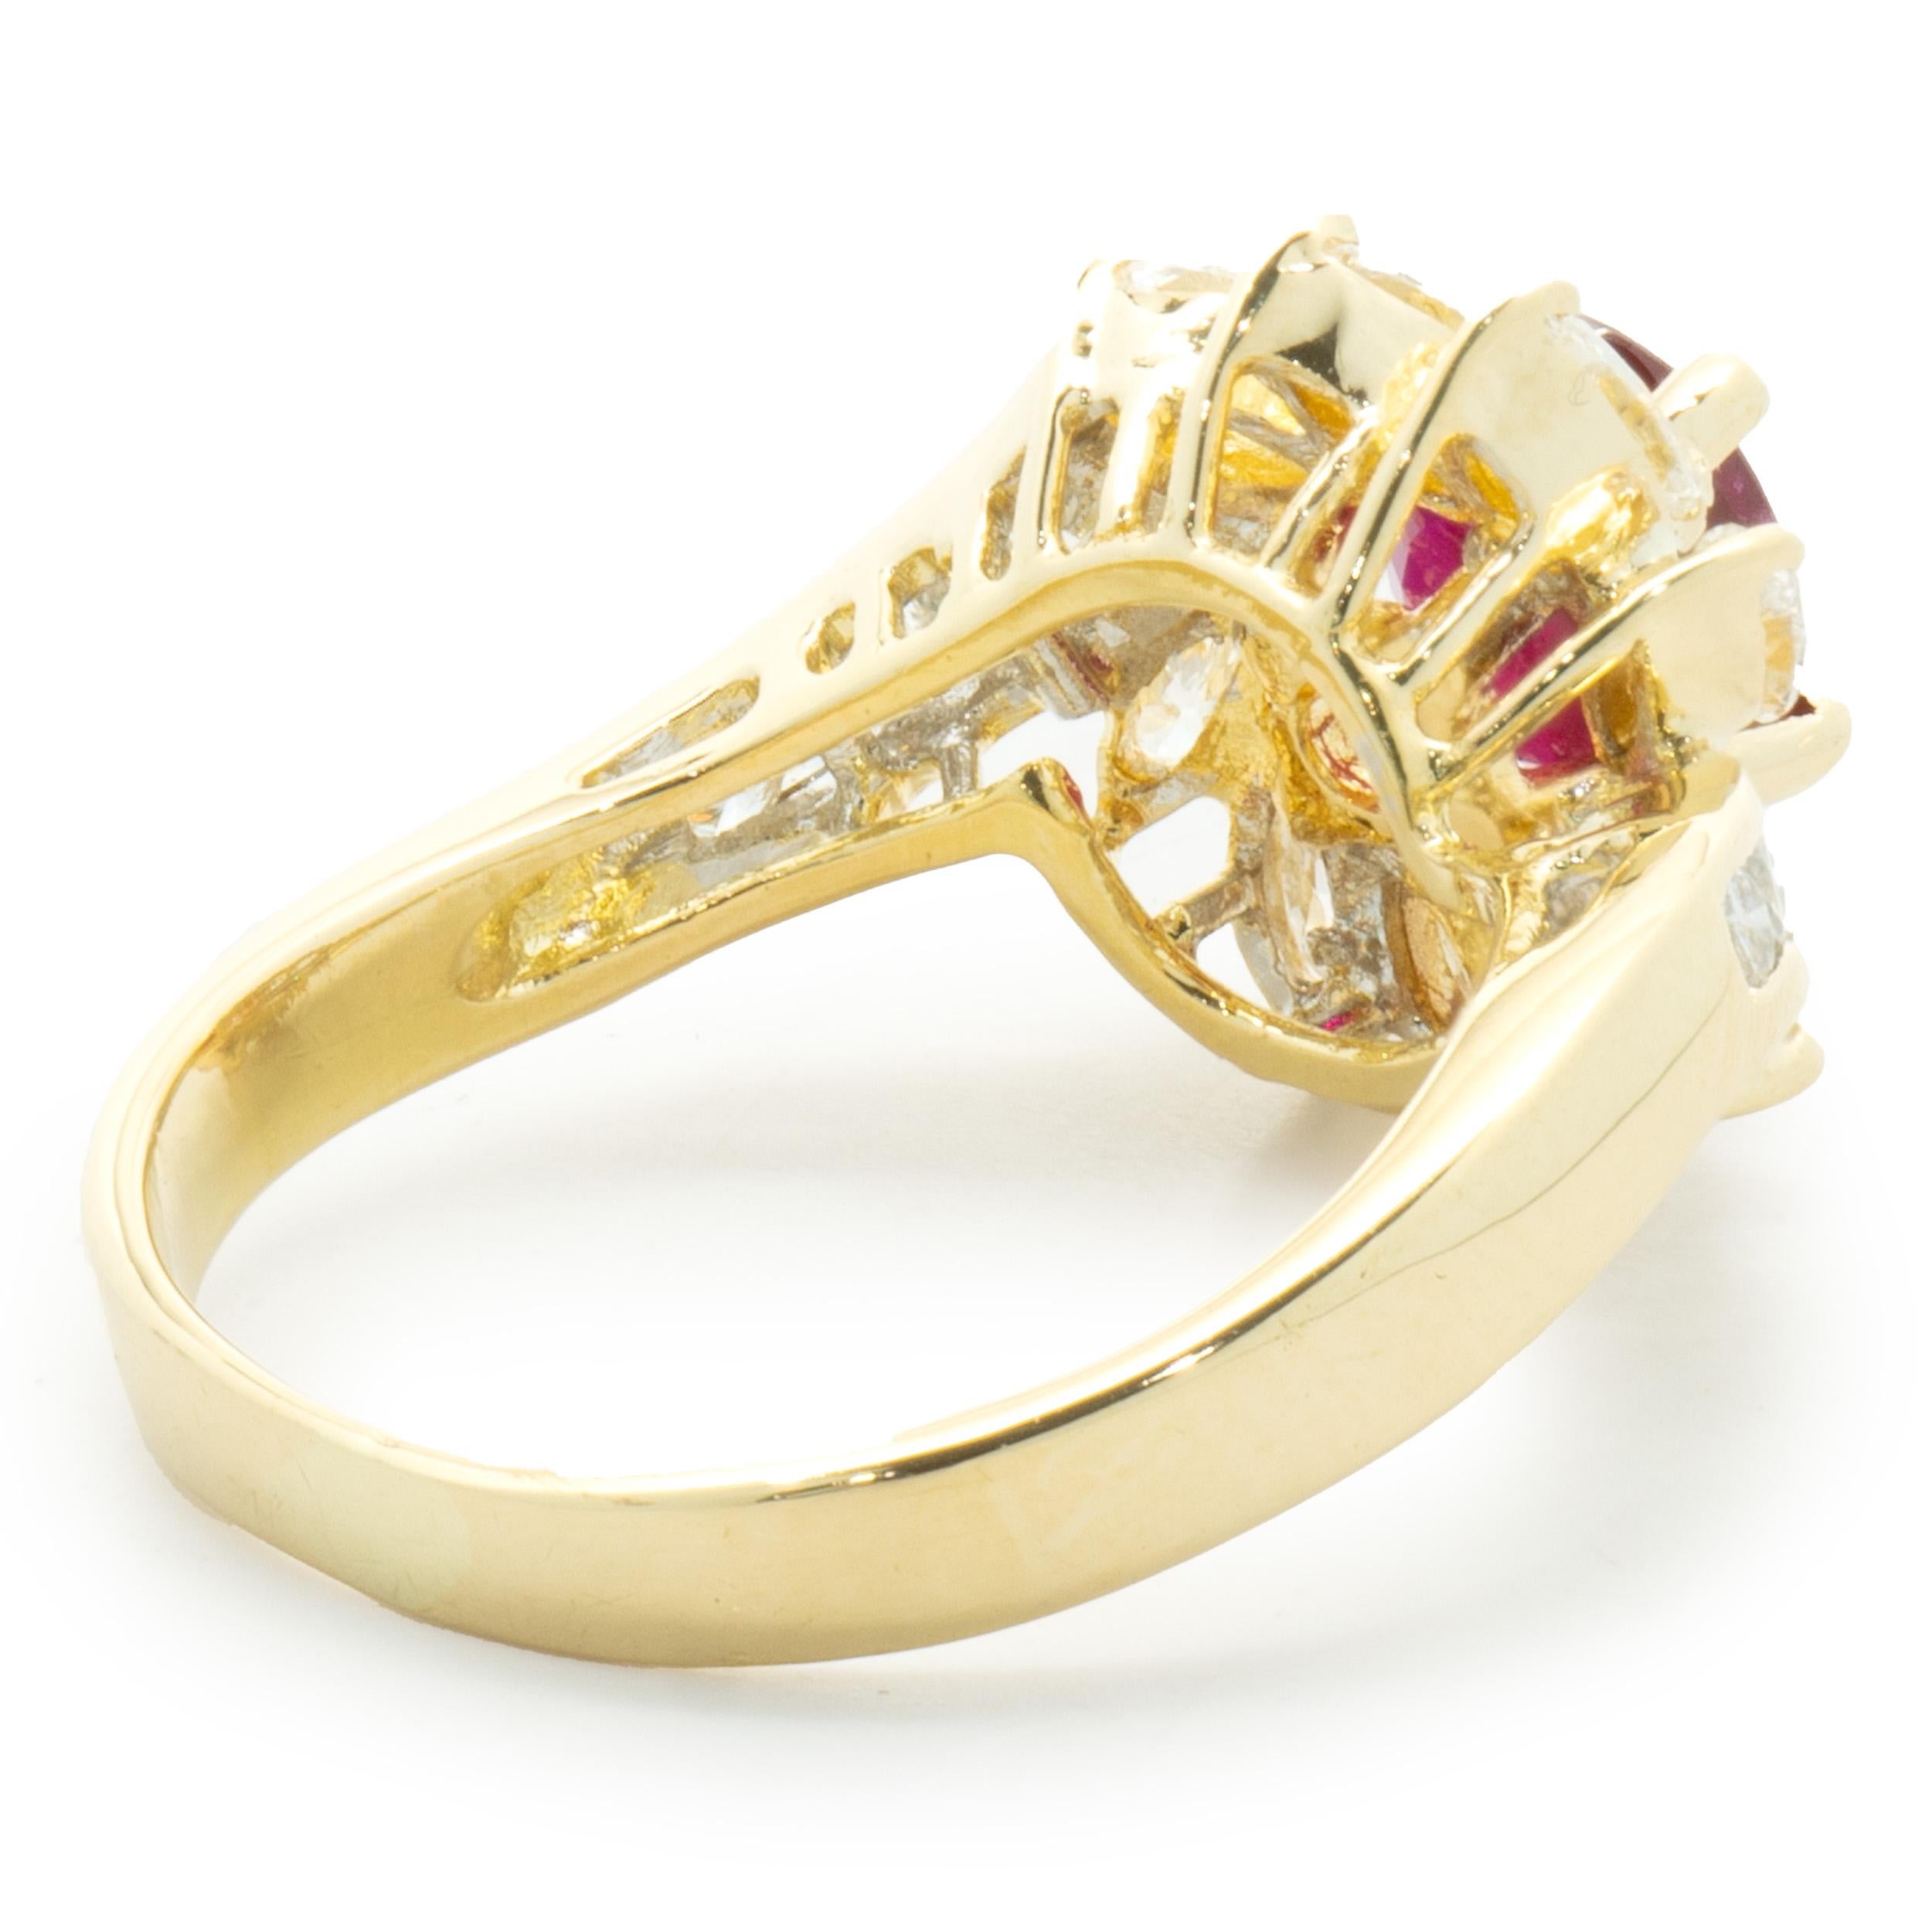 18 Karat Yellow Gold Diamond and Ruby Cocktail Ring In Excellent Condition For Sale In Scottsdale, AZ